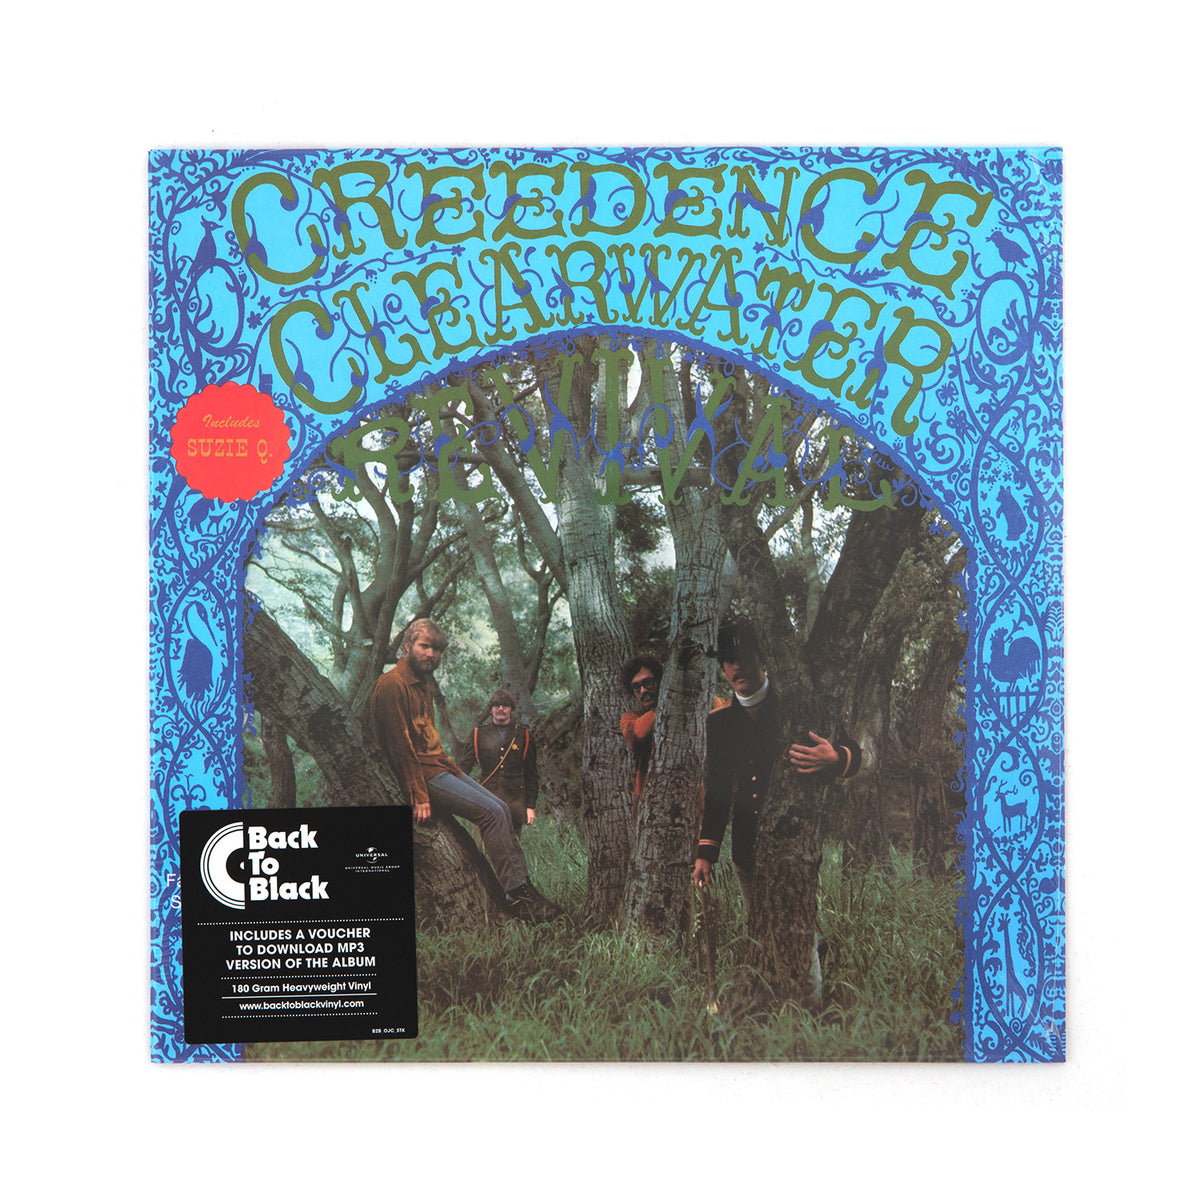 Creedence Clearwater Revival - Creedence Clearwater LP - Concrete